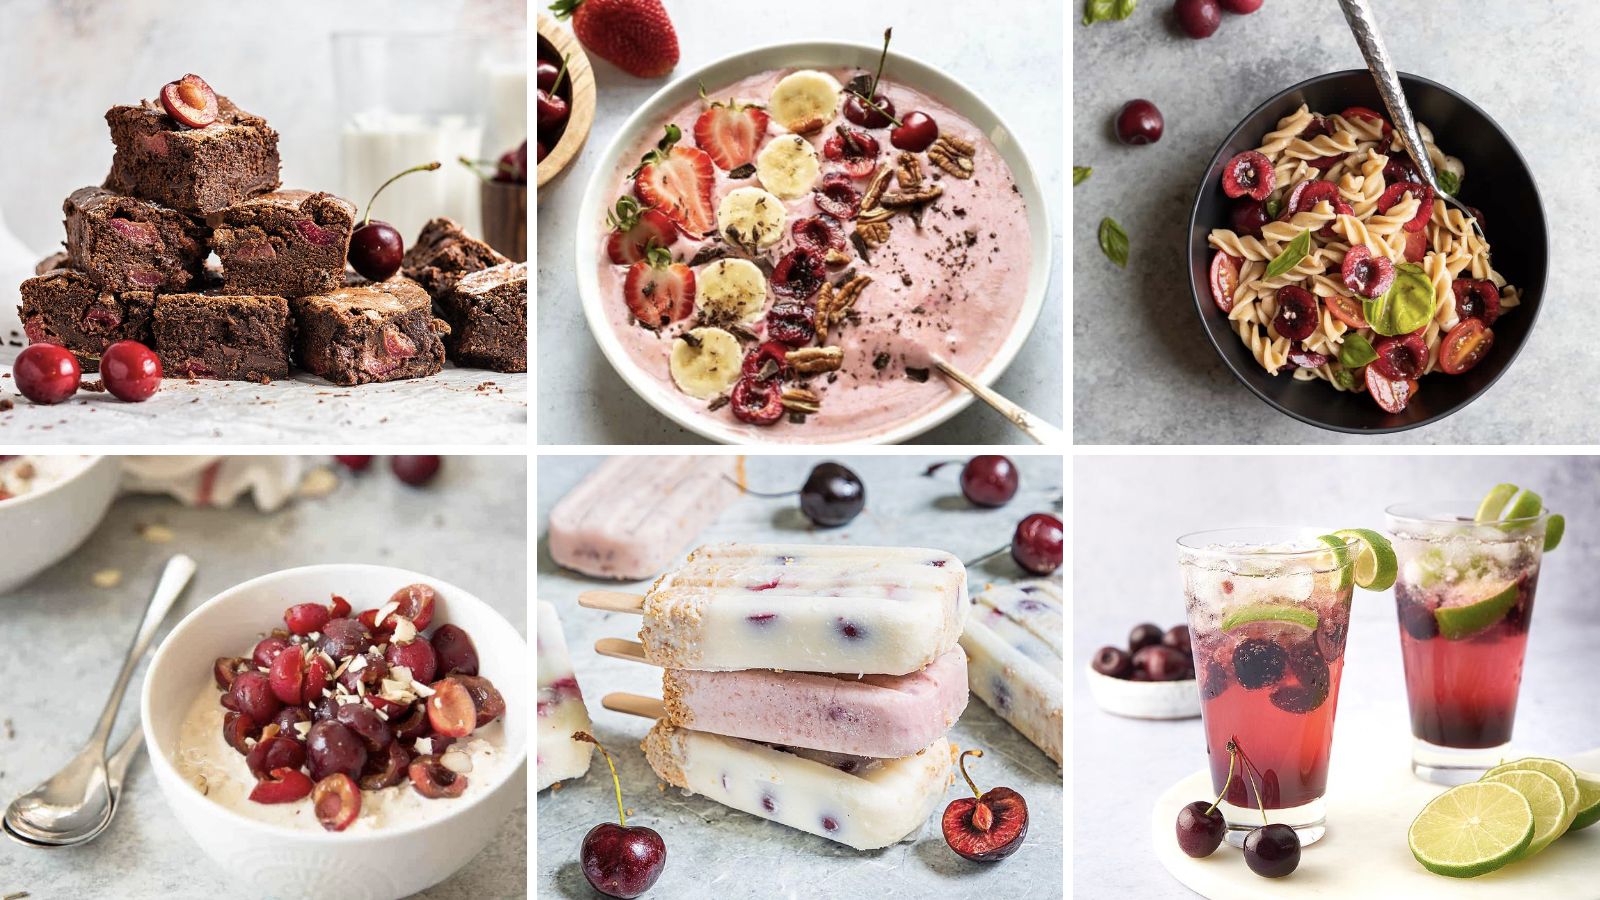 Cherry Recipes Collage: cherry brownies, cherry smoothie bowl, cherry caprese salad, cherry oats, cherry bars, cherry drink.